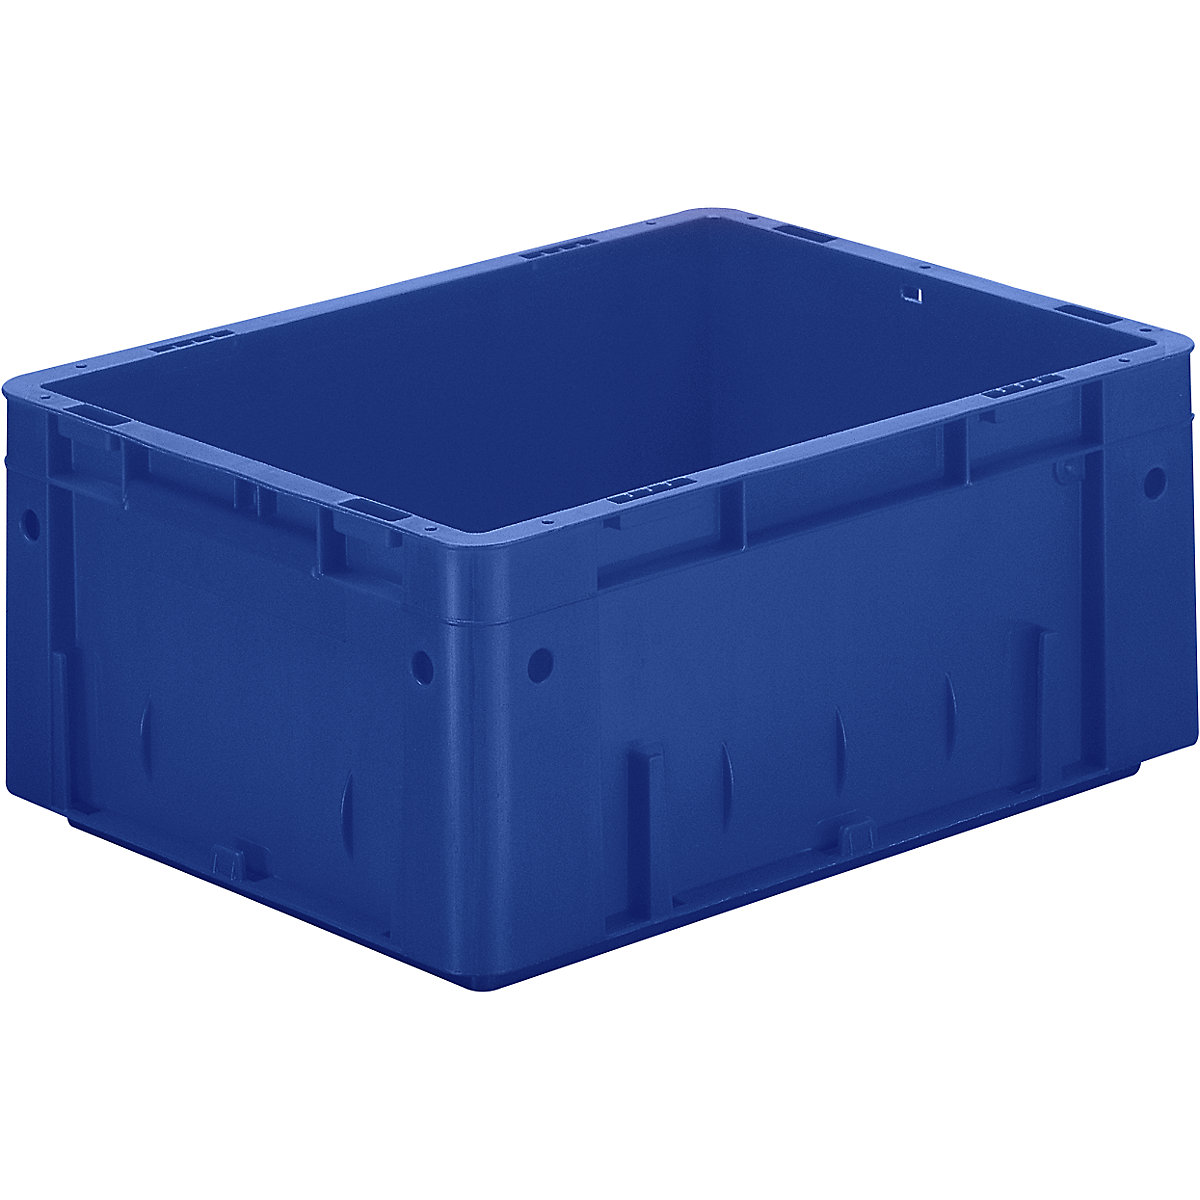 Heavy duty Euro container, polypropylene, capacity 14.5 l, LxWxH 400 x 300 x 175 mm, solid walls, solid base, blue, pack of 4-4